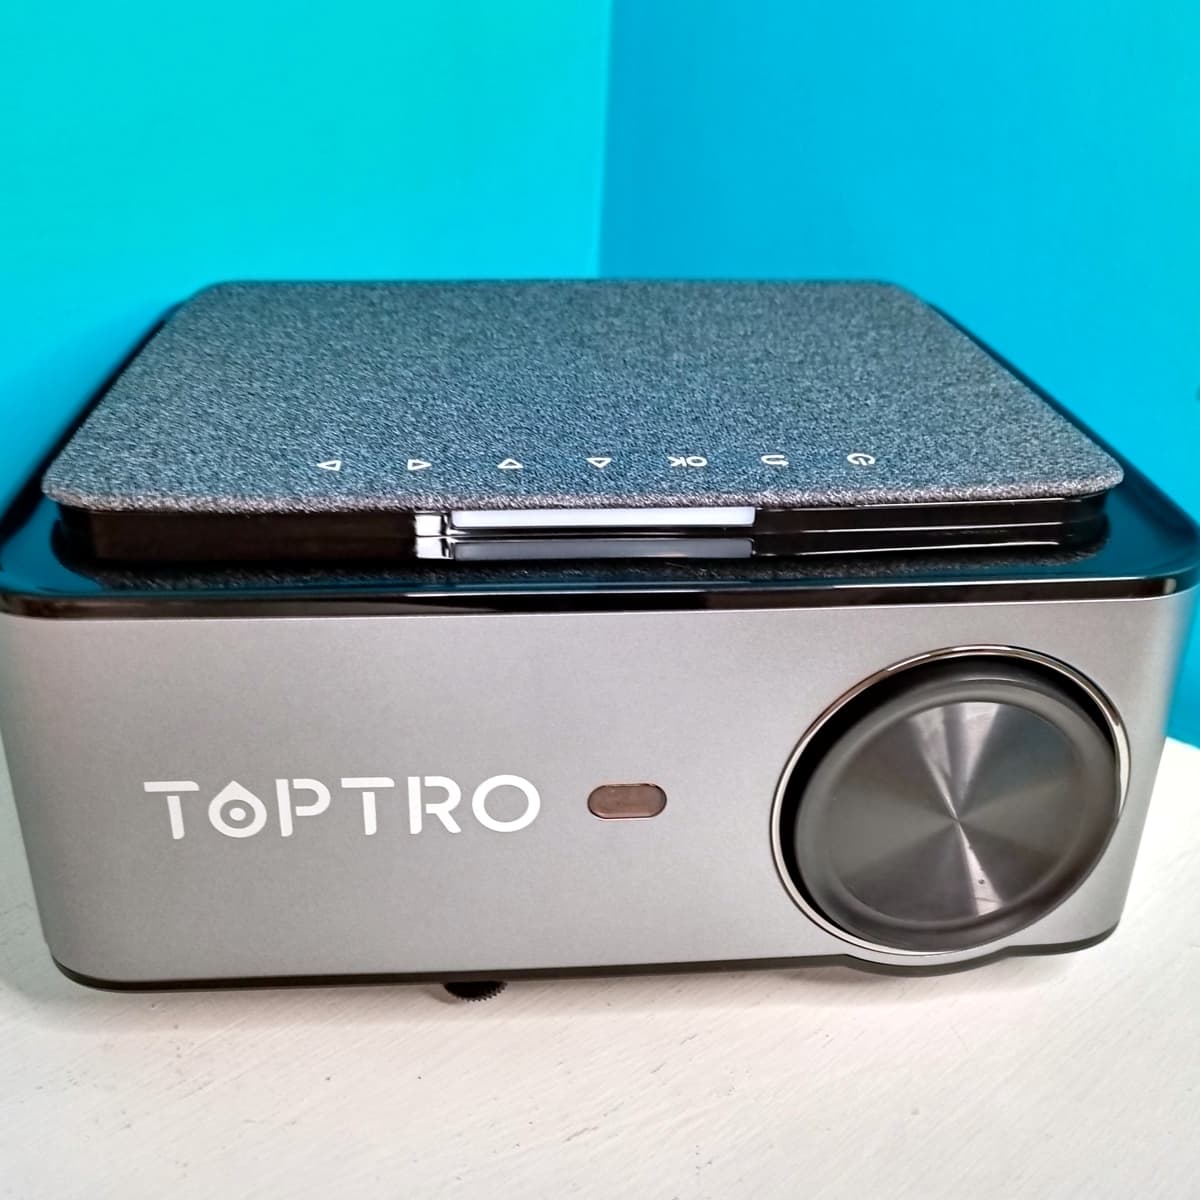 White Toptro X3 Projector Bundle! NEVER USED. Includes HDMI cable